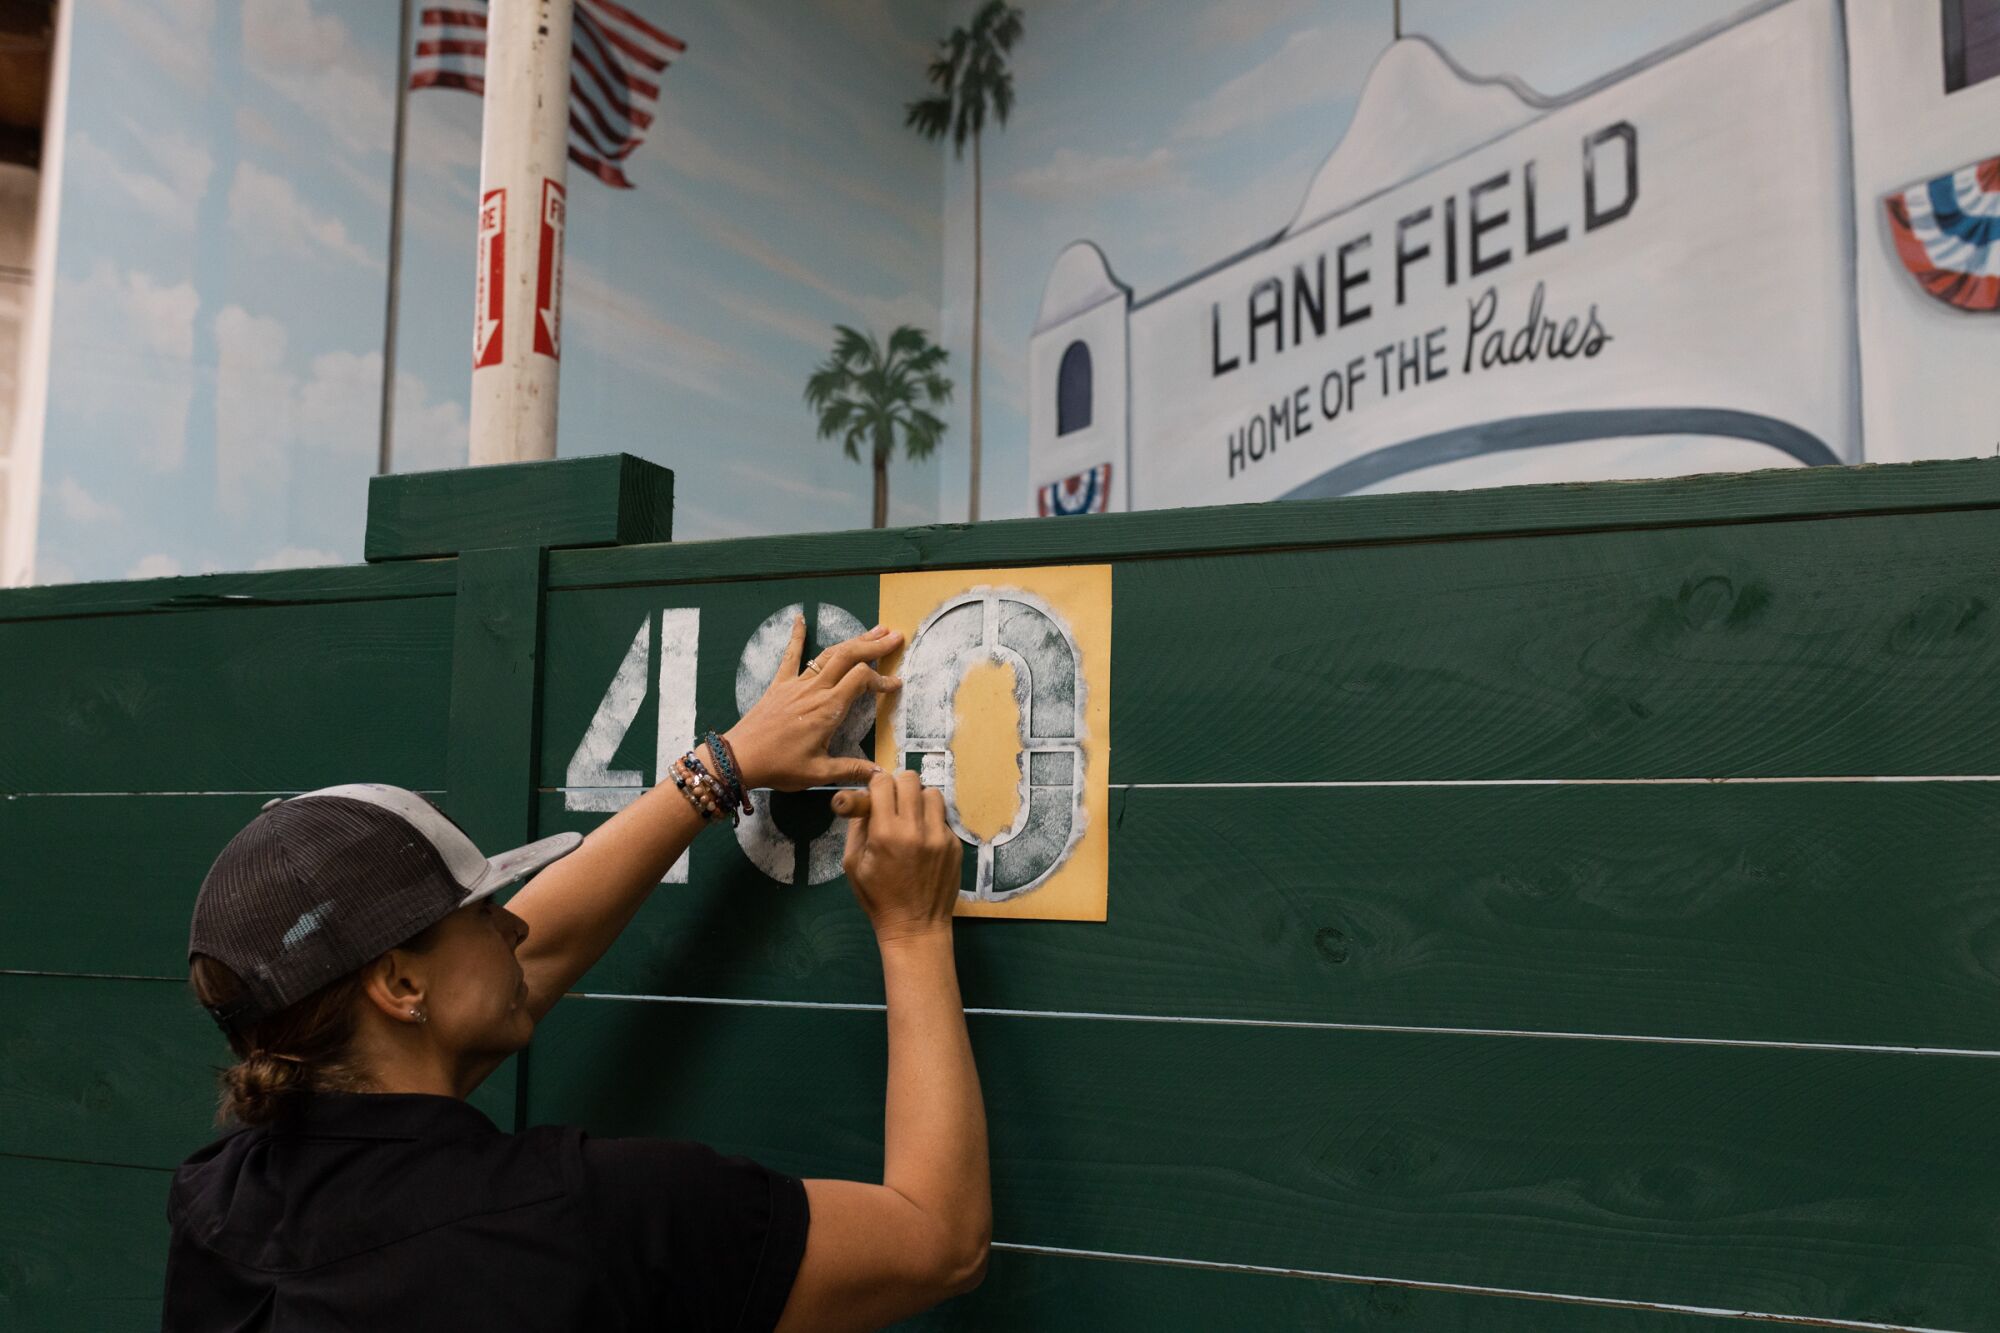 a painter uses a stencil to add a 0 to a replica baseball field fence in front of an indoor mural